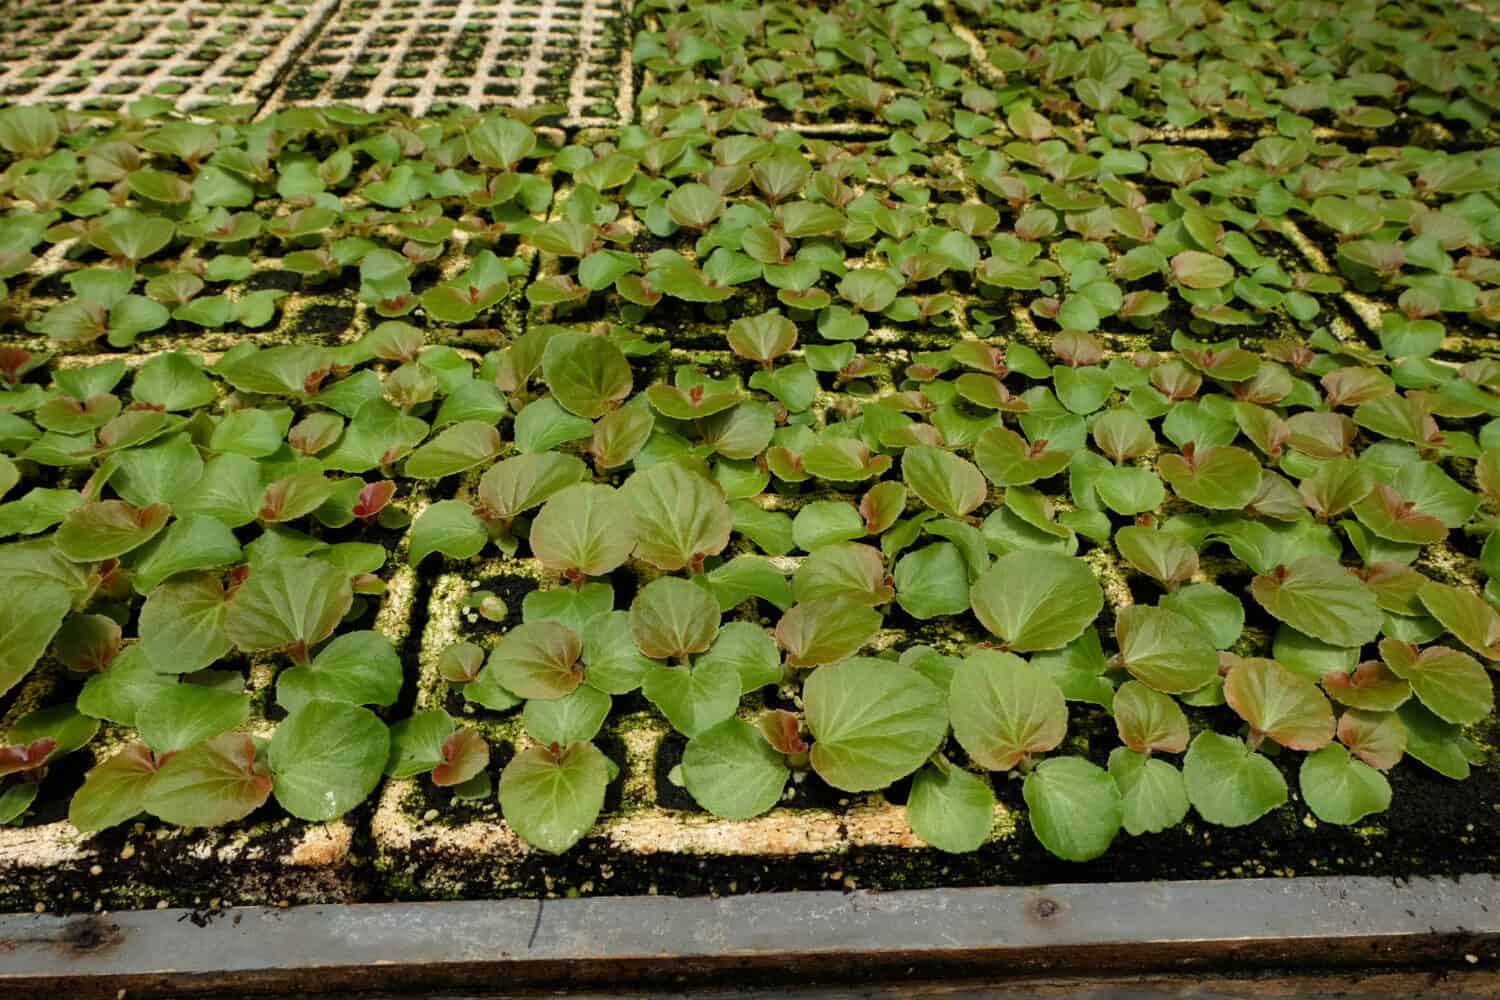 Begonia propagation in Royal project,Chiangrai,Thailand